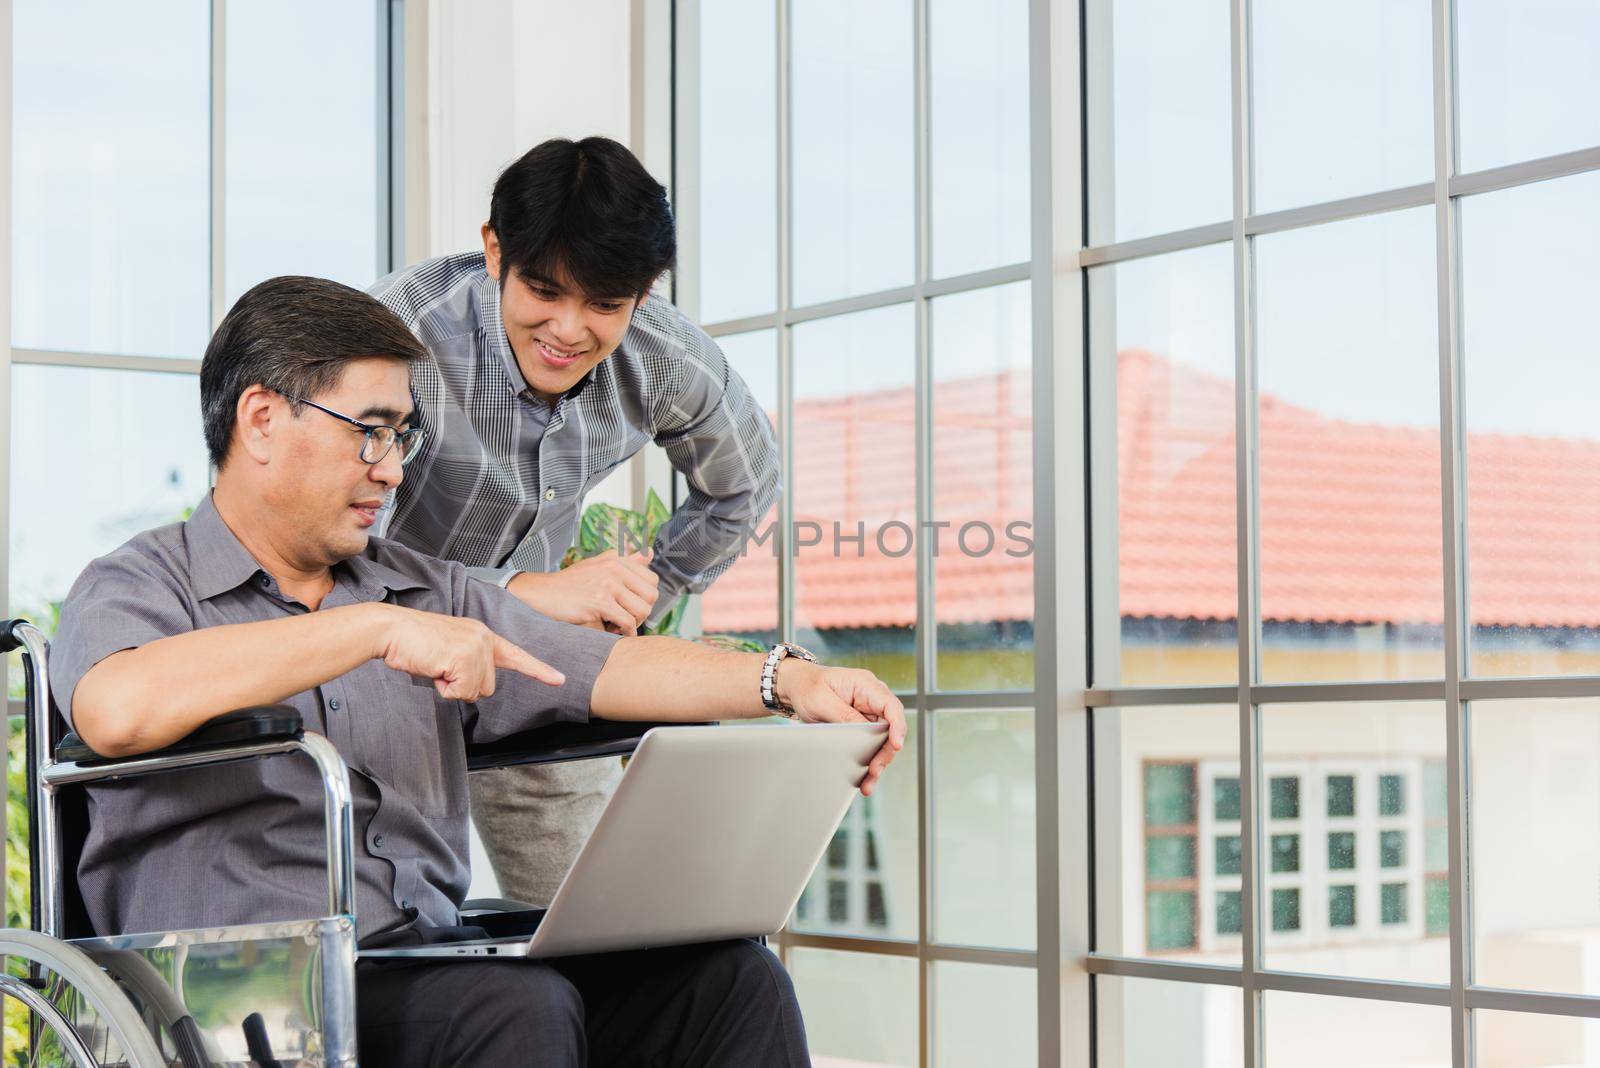 Asian senior disabled businessman in a wheelchair with laptop computer discuss together with team in office. Old father man sitting wheelchair and his son talking video calls conference on laptop